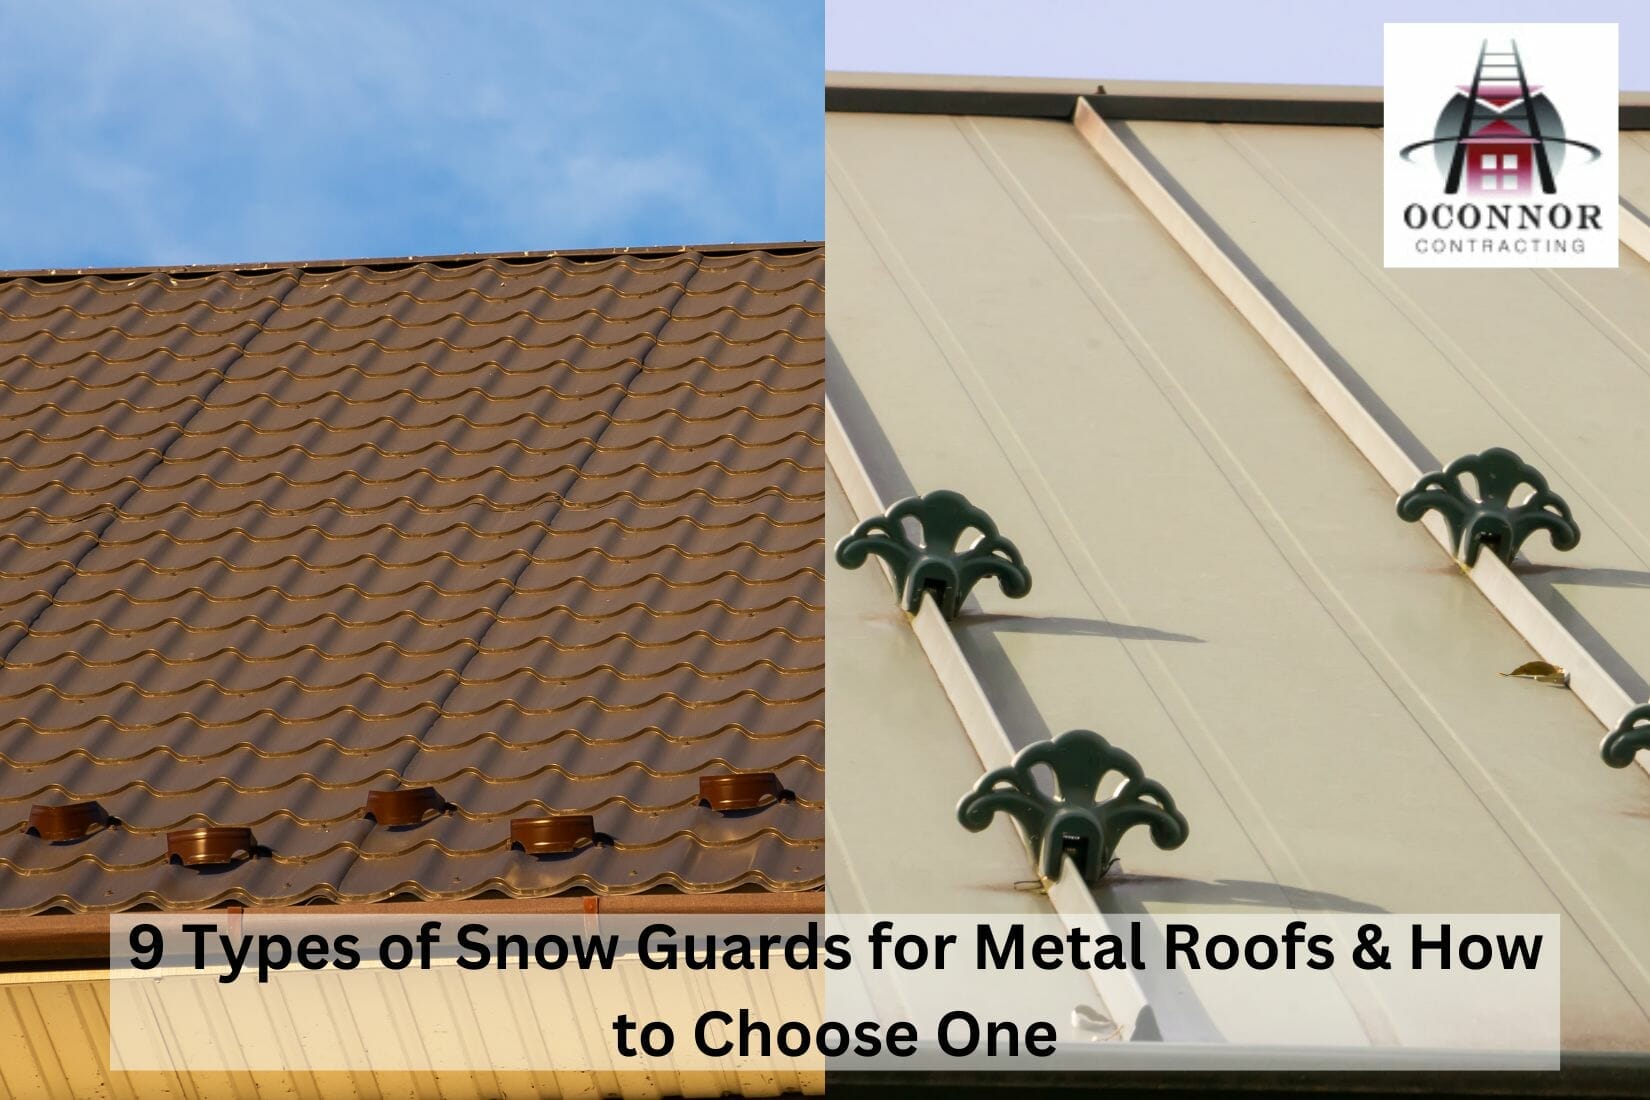 9 Types of Snow Guards for Metal Roofs & How to Choose One